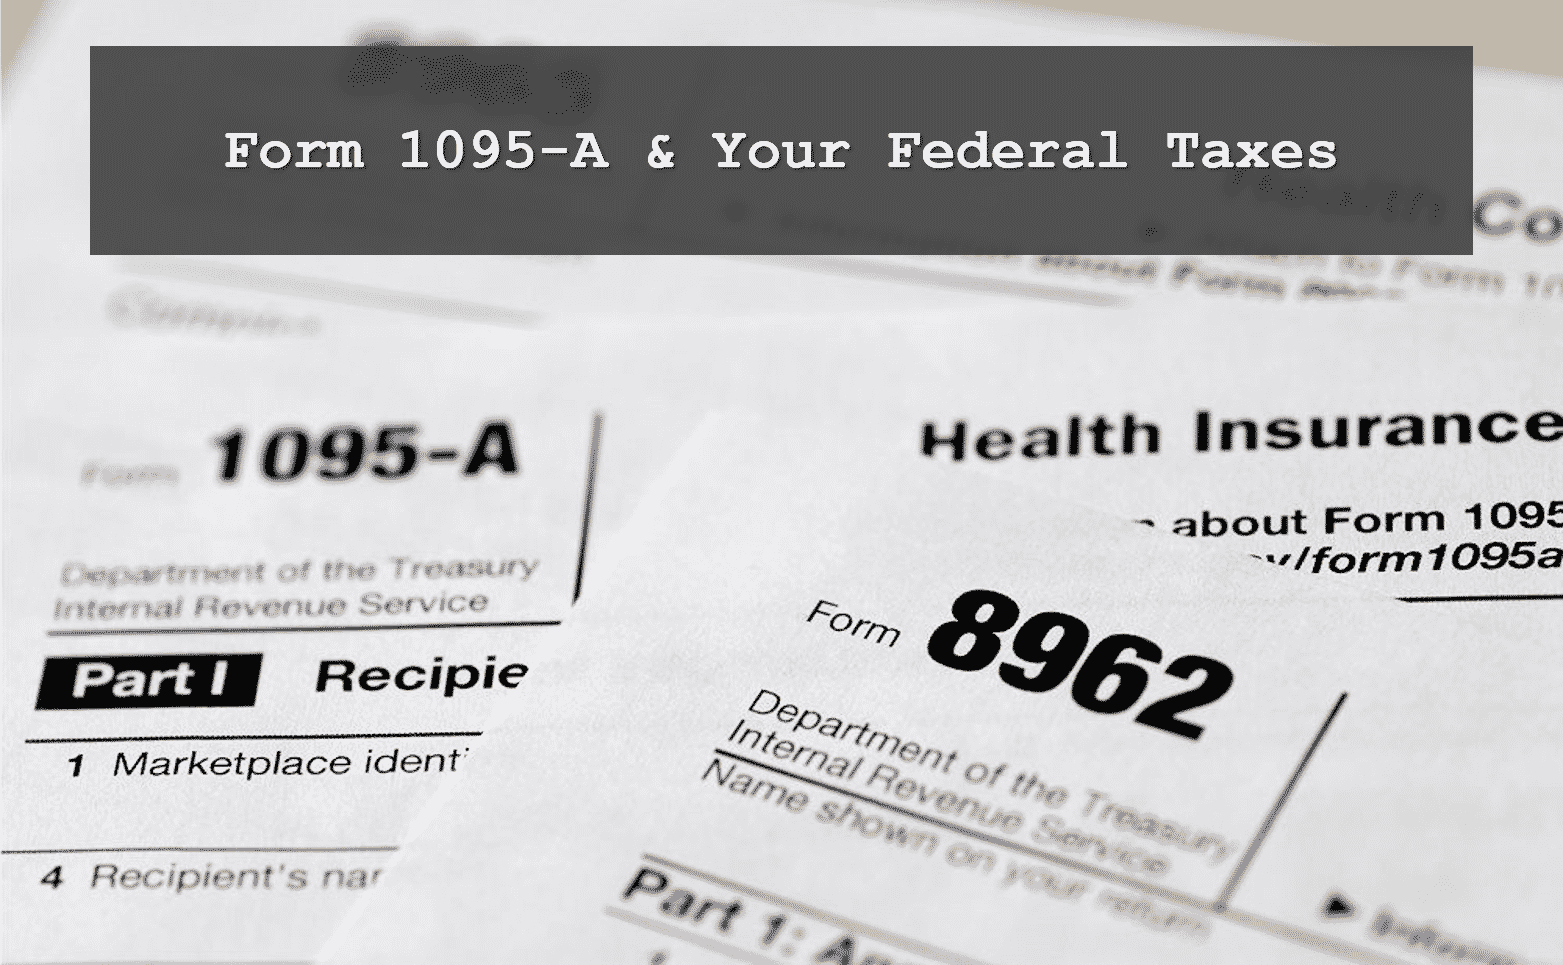 Form 1095-A & Your Federal Taxes